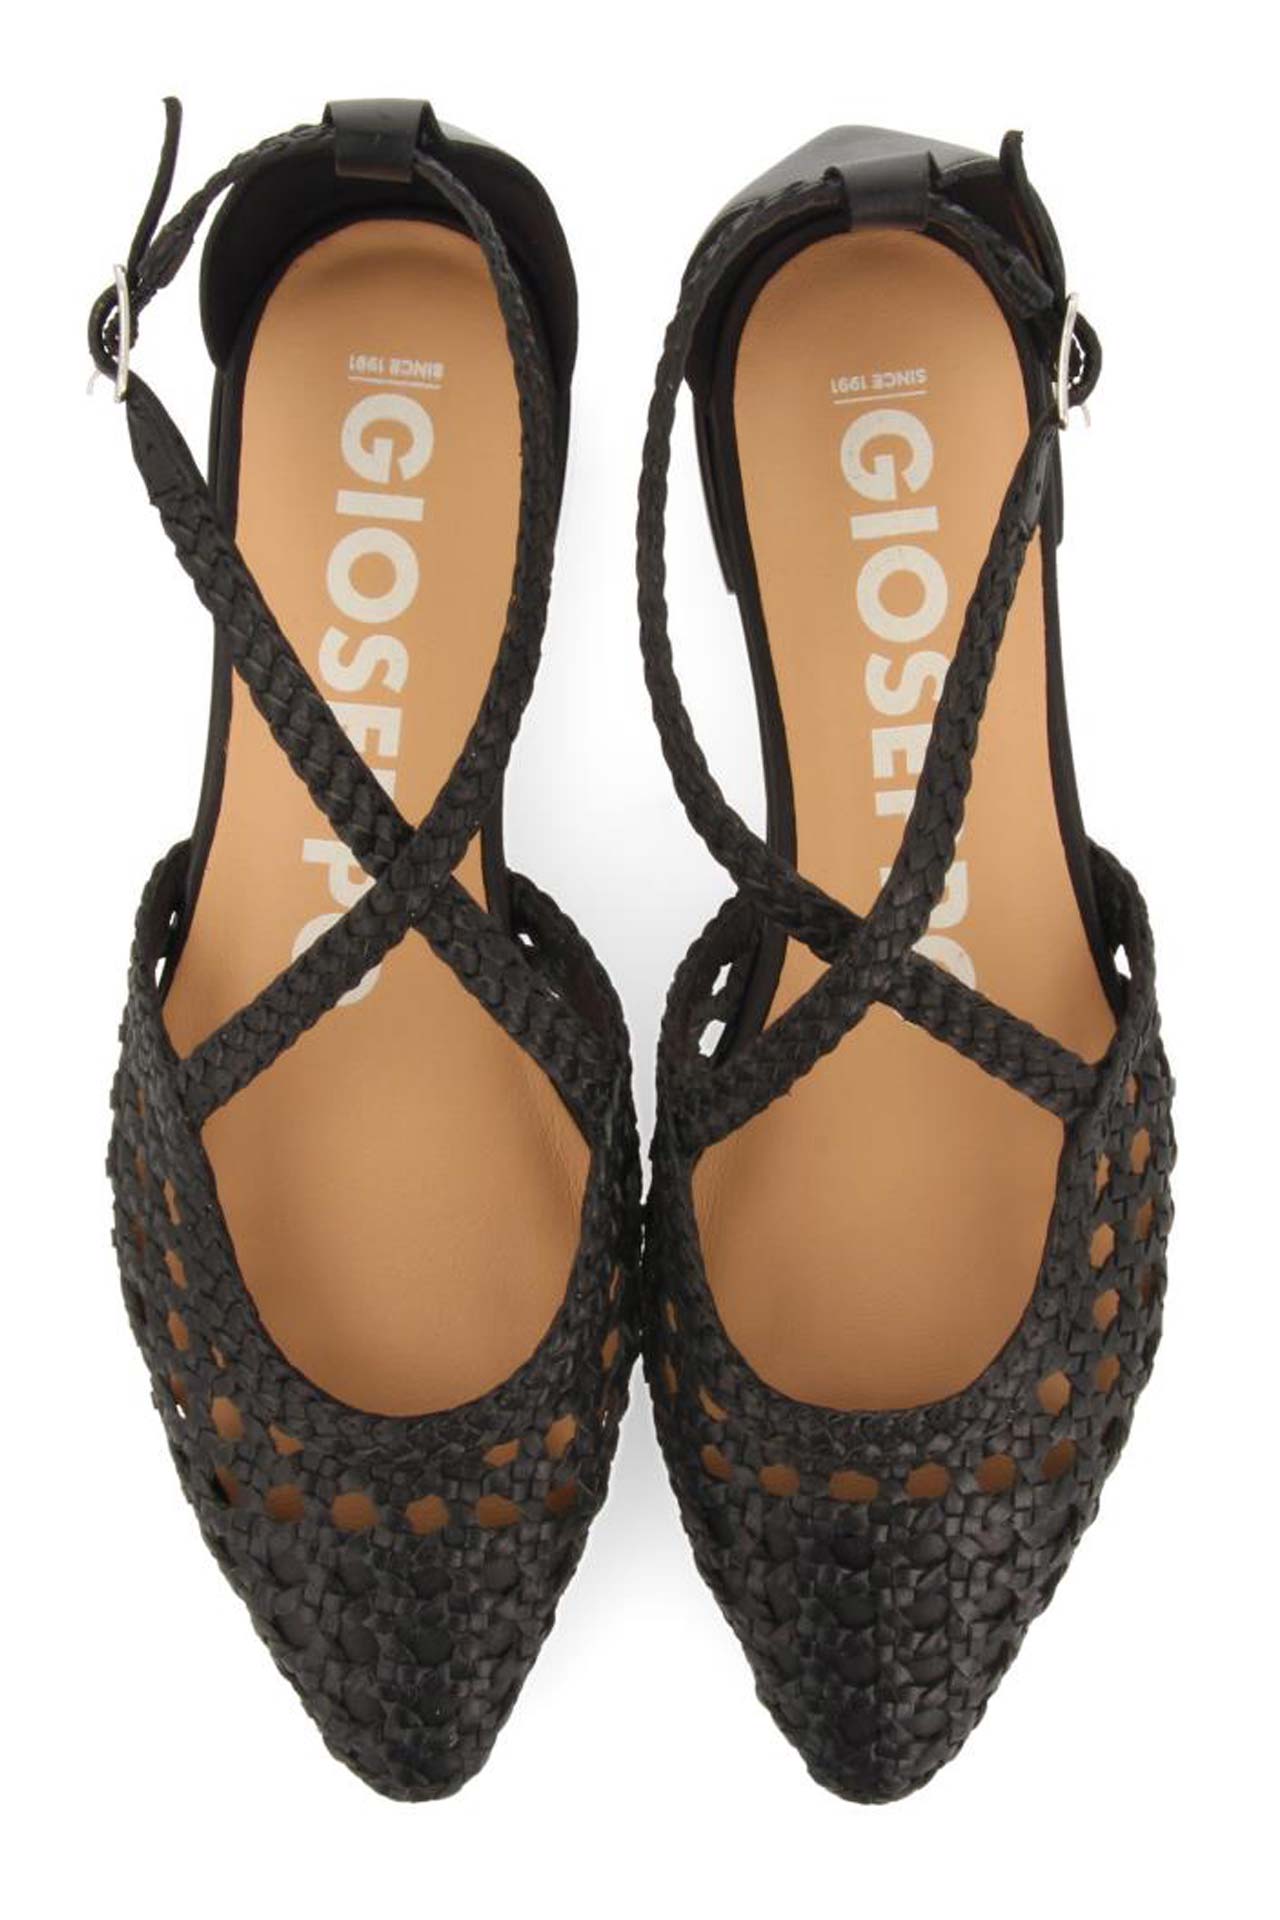 GIOSEPPO LESKOVIC BLACK LEATHER BALLERINAS WITH BRAIDED DETAIL